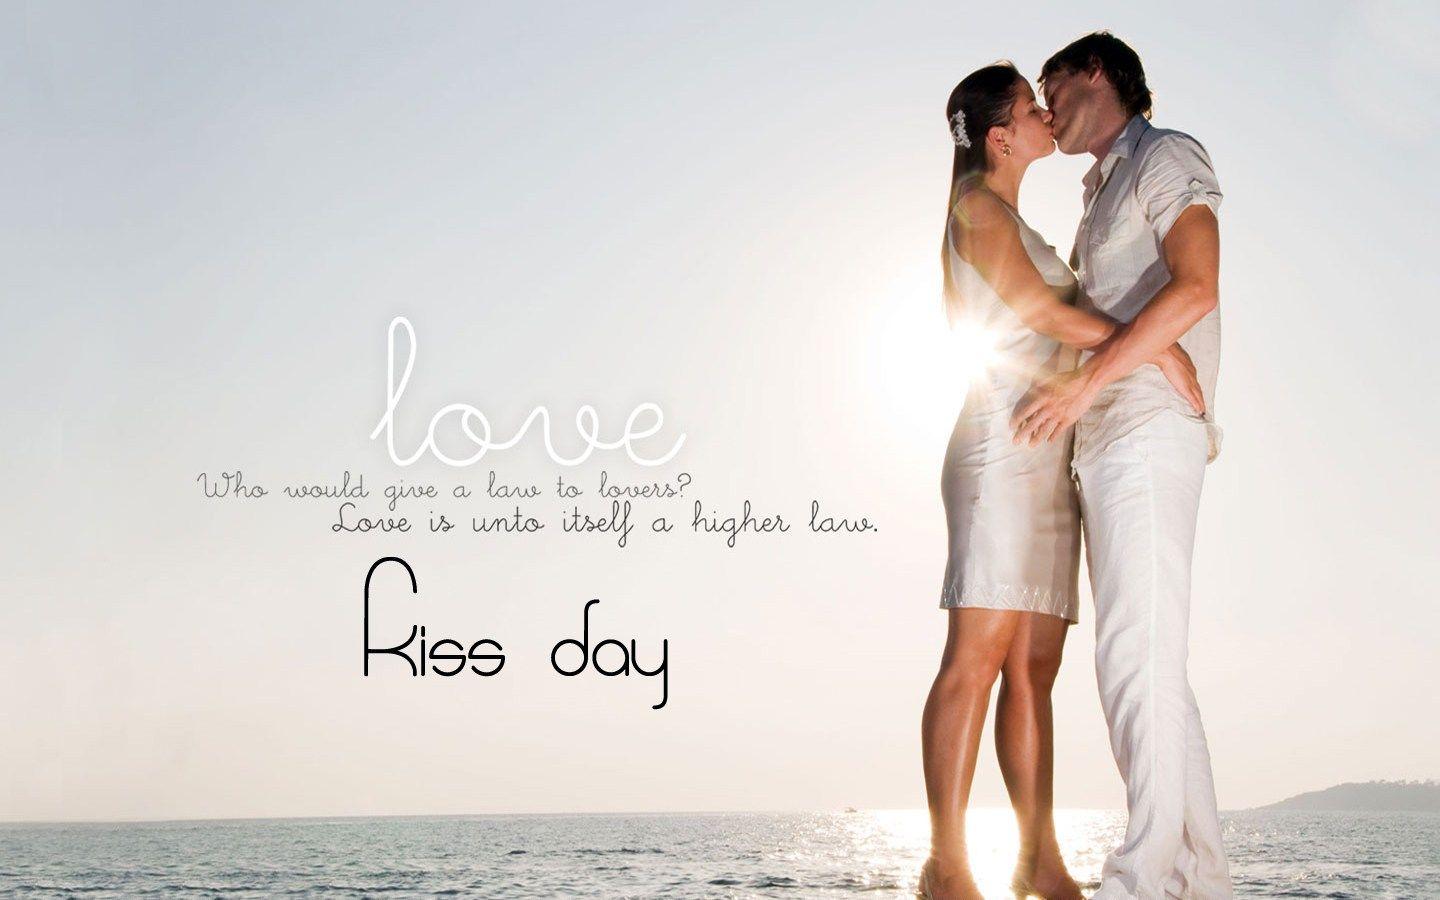 Happy Kiss Day Wallpaper, Quotes, Image That will Inspire You